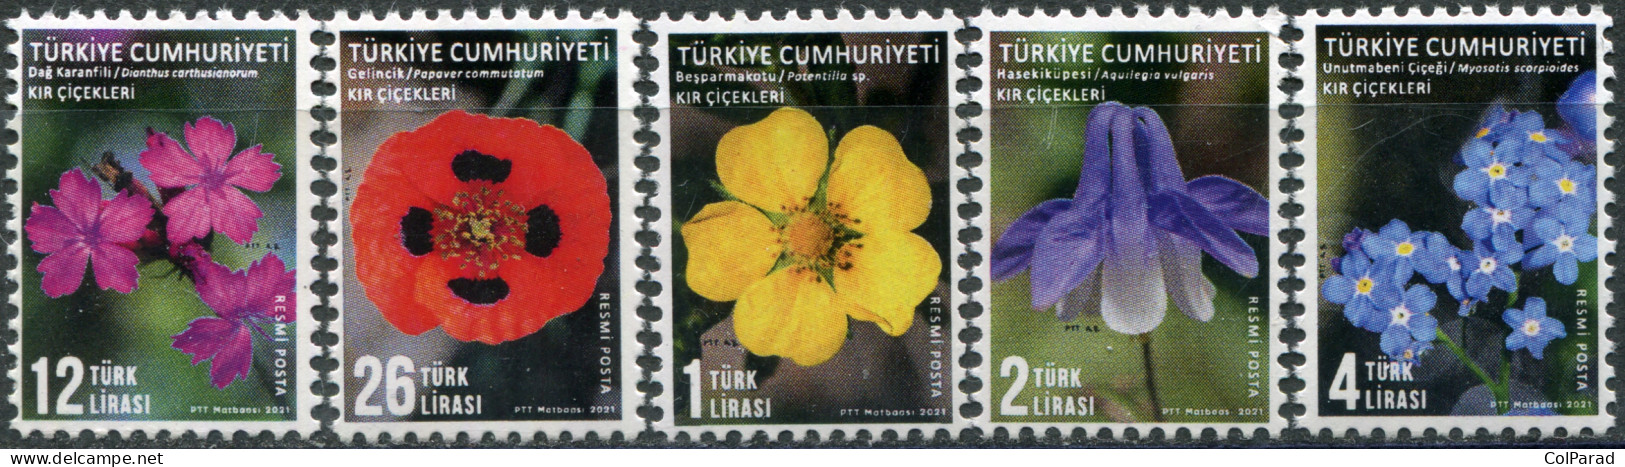 TURKEY - 2021 - SET OF 5 STAMPS MNH ** - Wildflowers - Unused Stamps